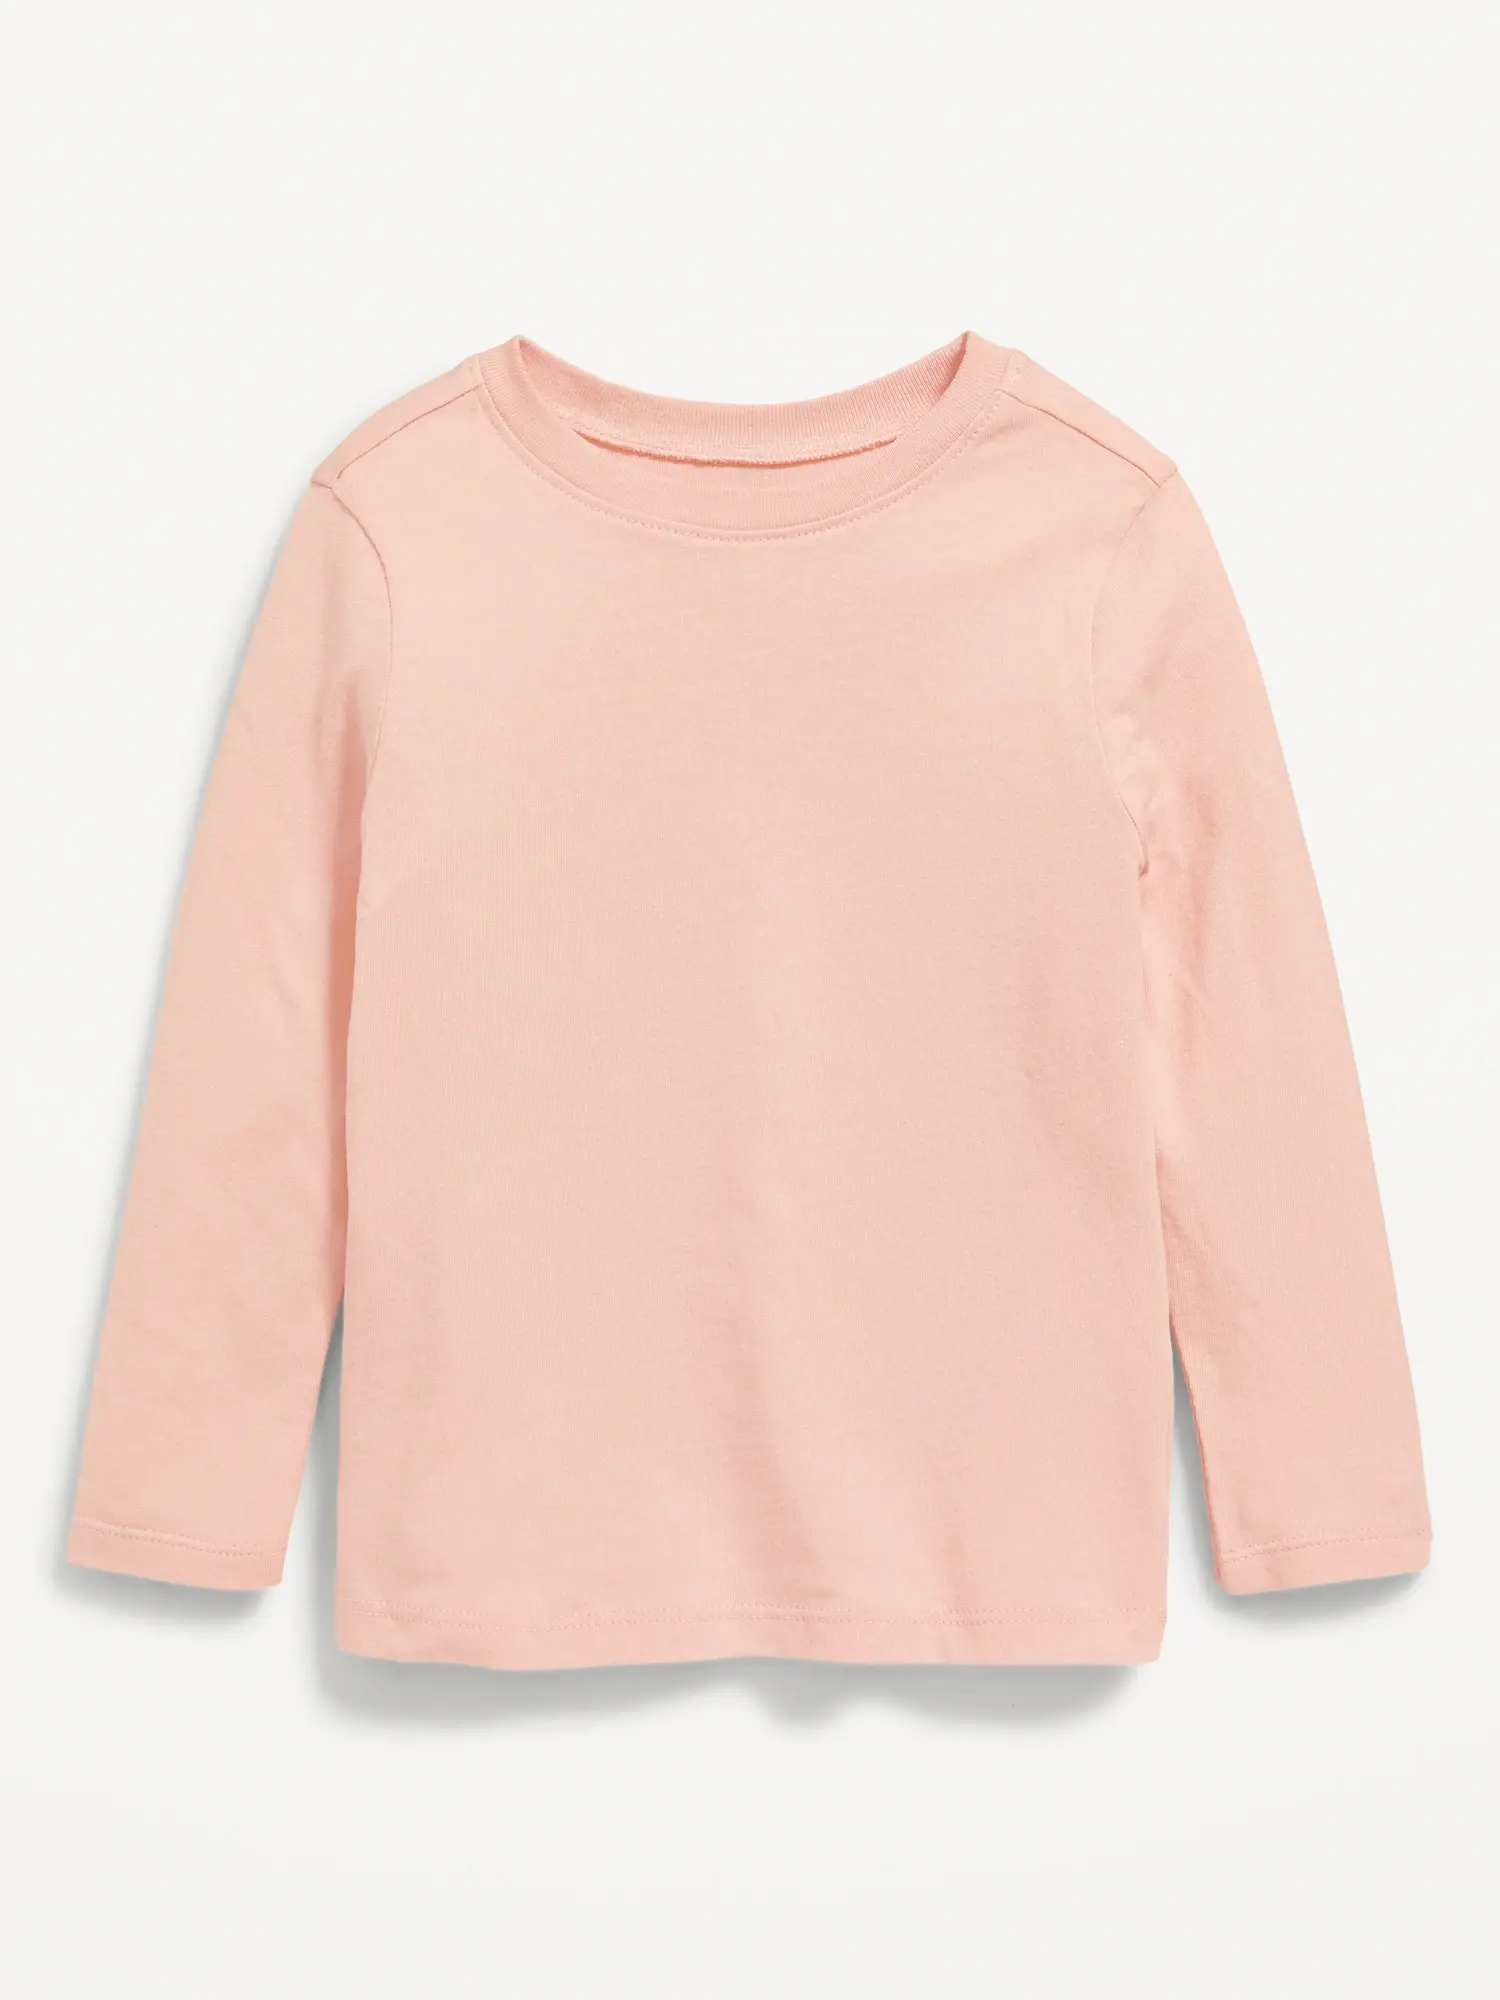 Old Navy Unisex Long-Sleeve T-Shirt for Toddler pink. 1